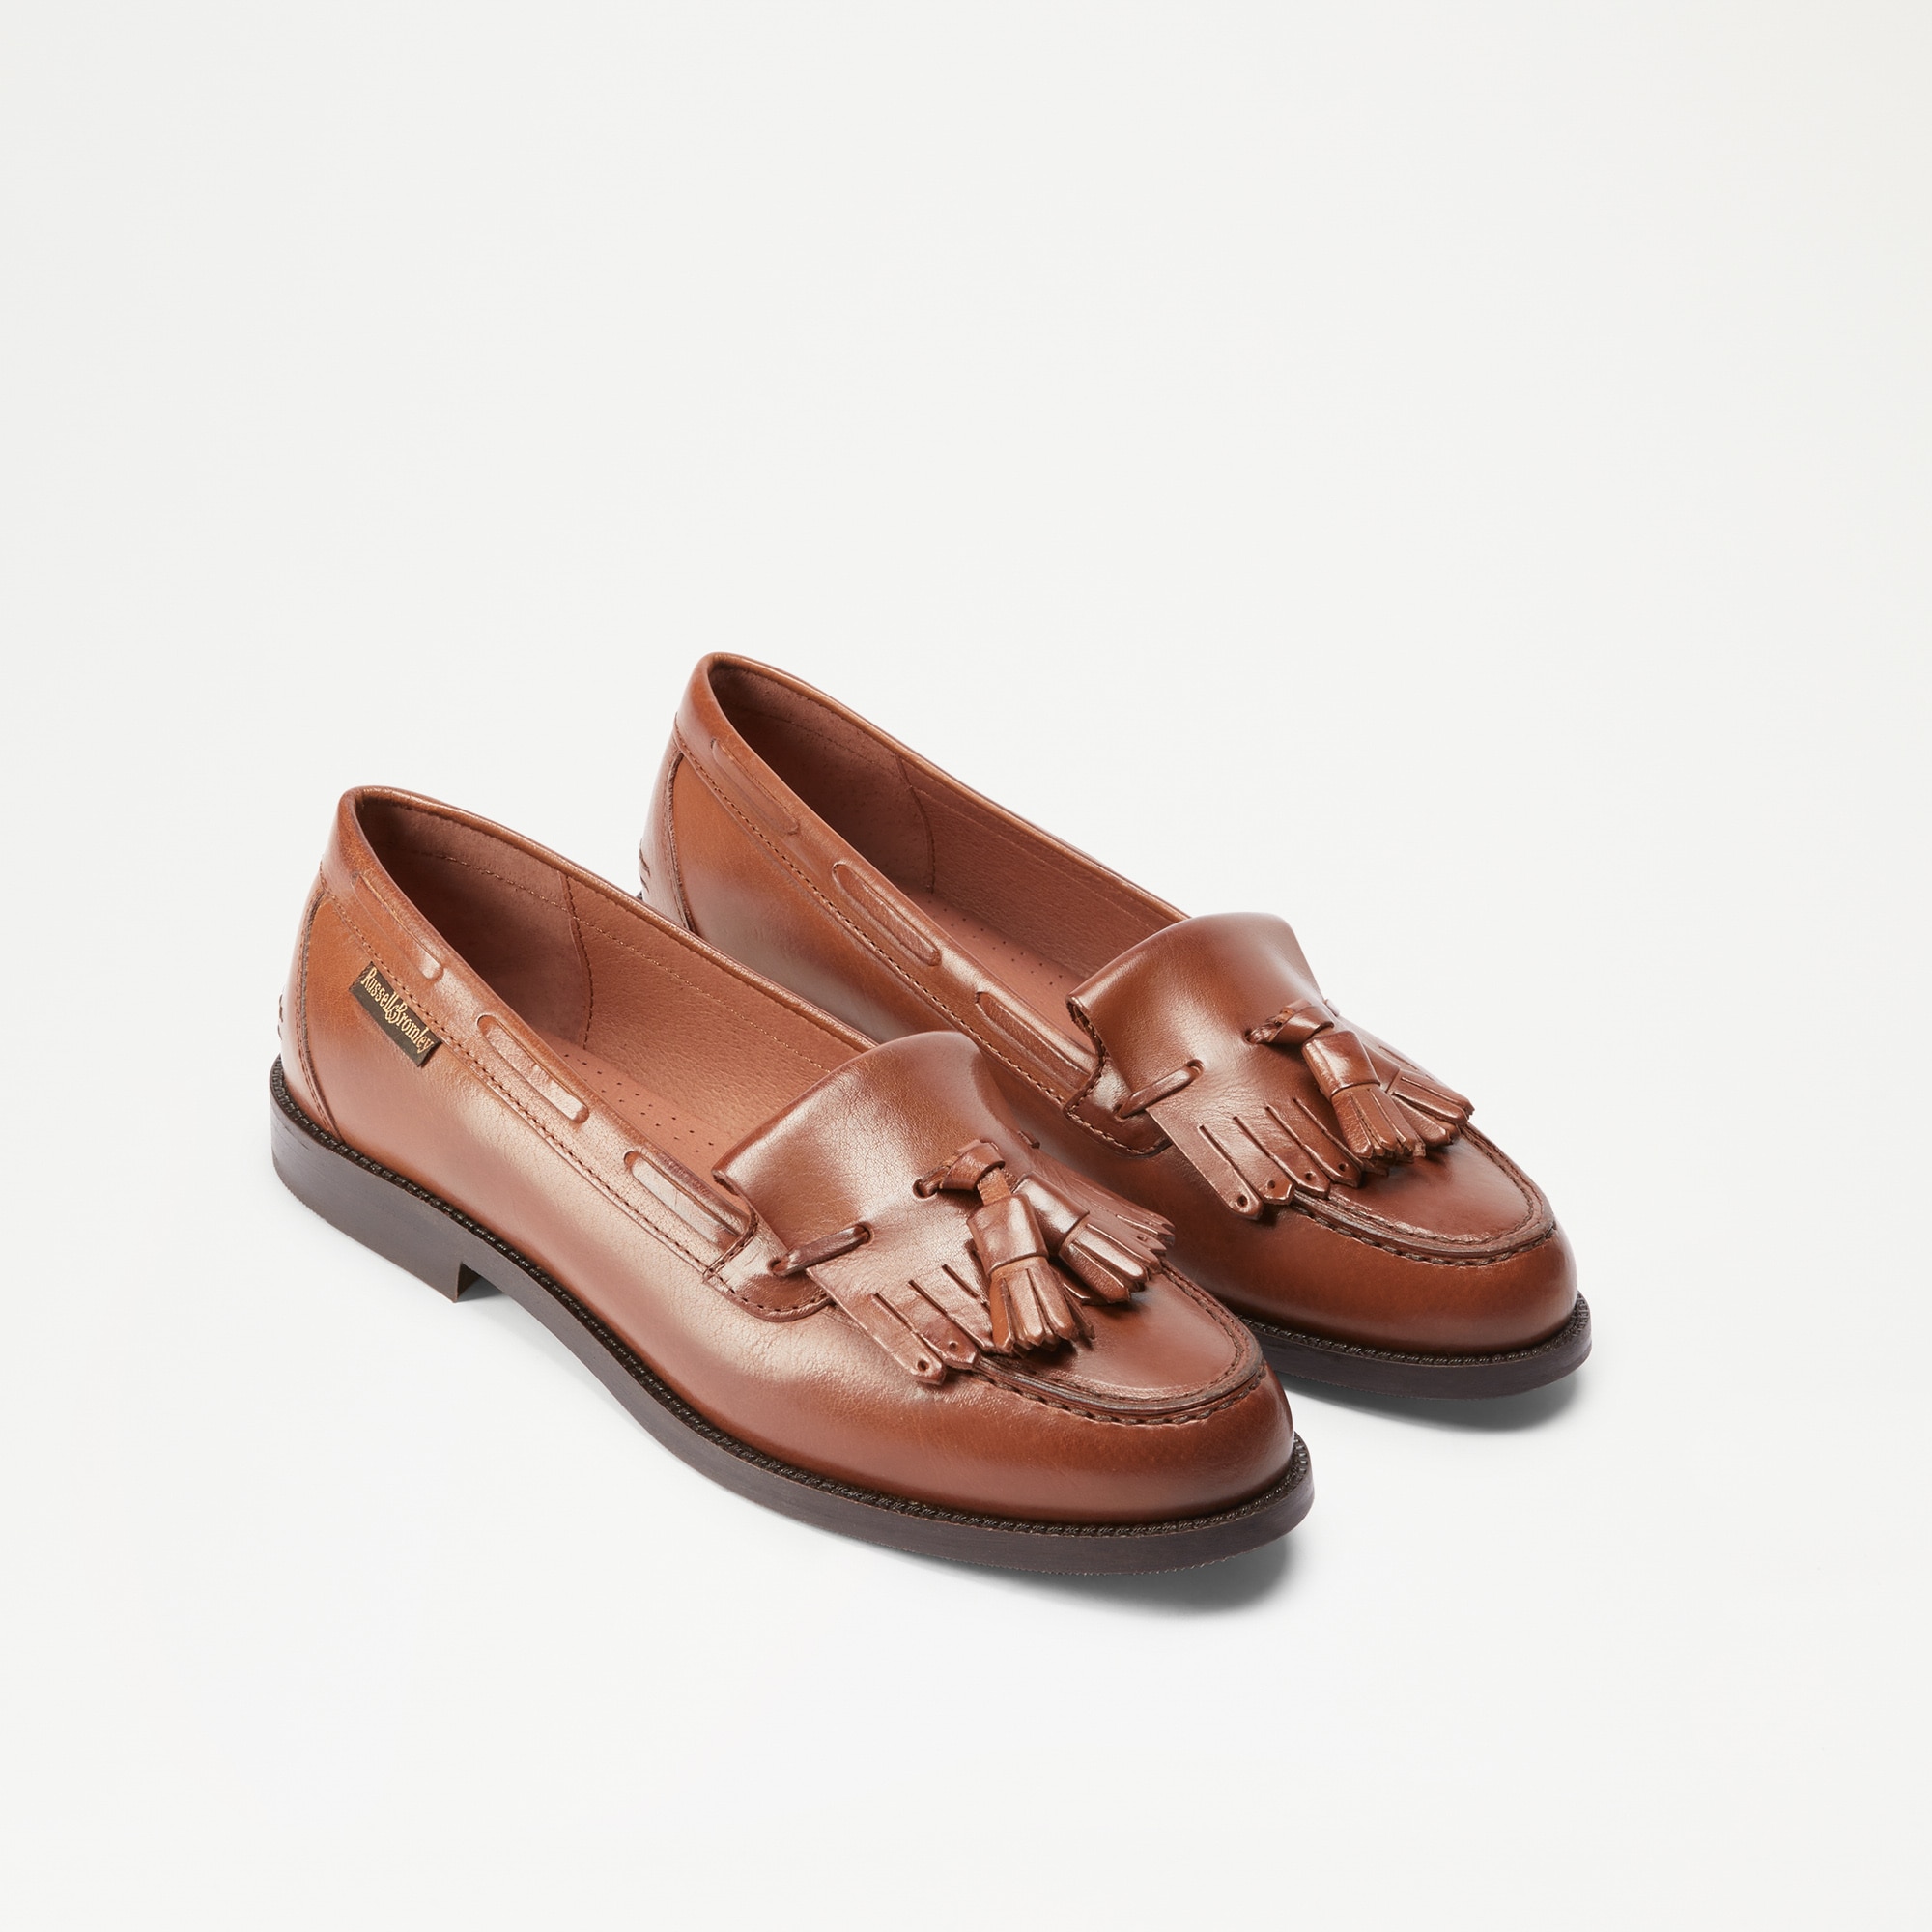 CHESTER Tassel Loafer in Tan Calf | Russell & Bromley